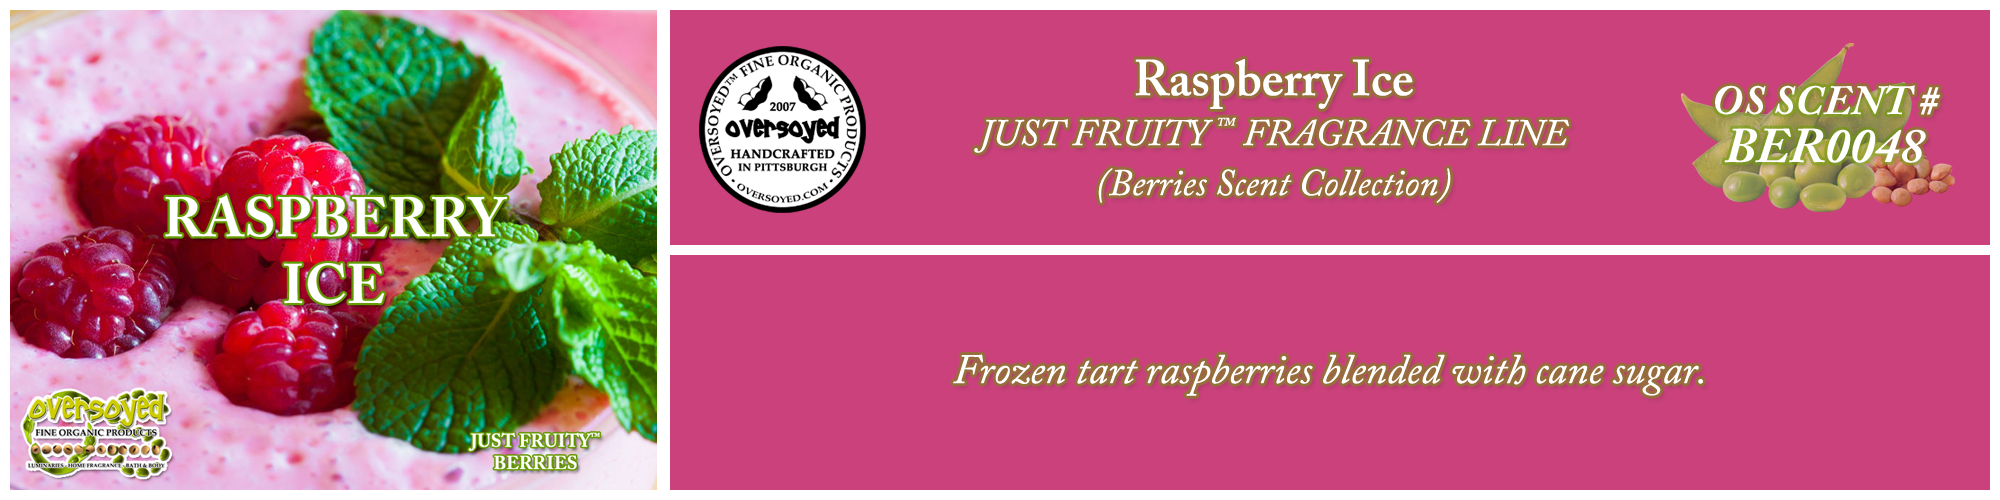 Raspberry Ice Handcrafted Products Collection